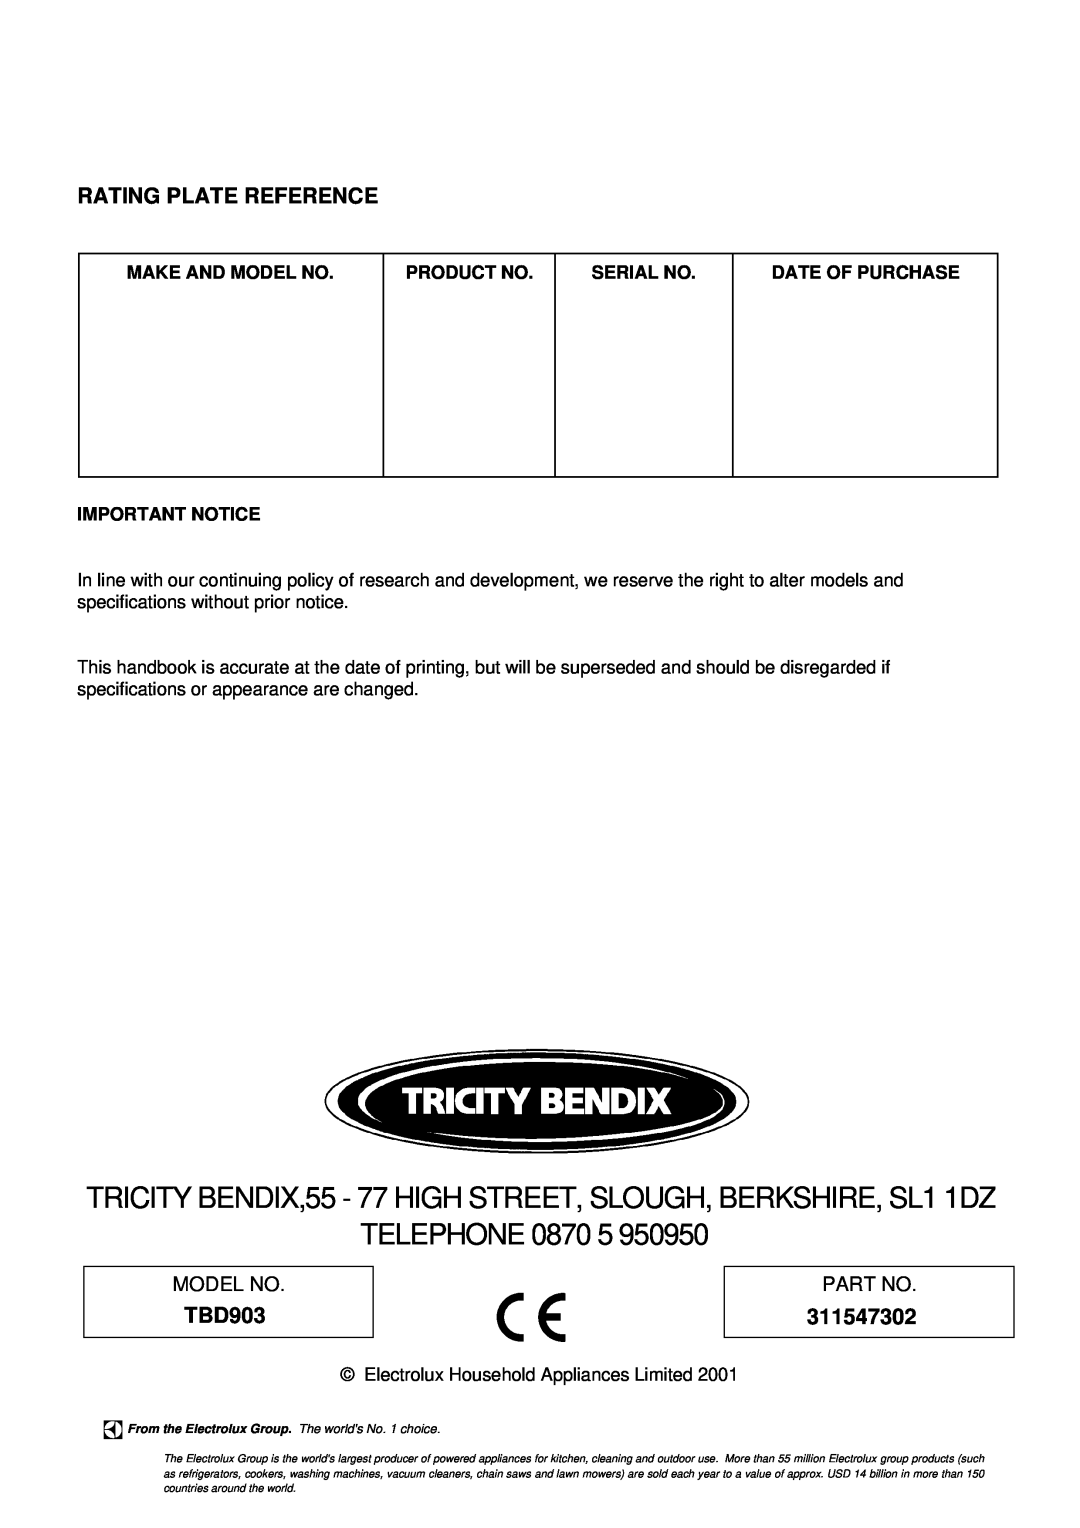 Tricity Bendix TBD903 Rating Plate Reference, 311547302, Make And Model No, Product No, Serial No, Date Of Purchase 